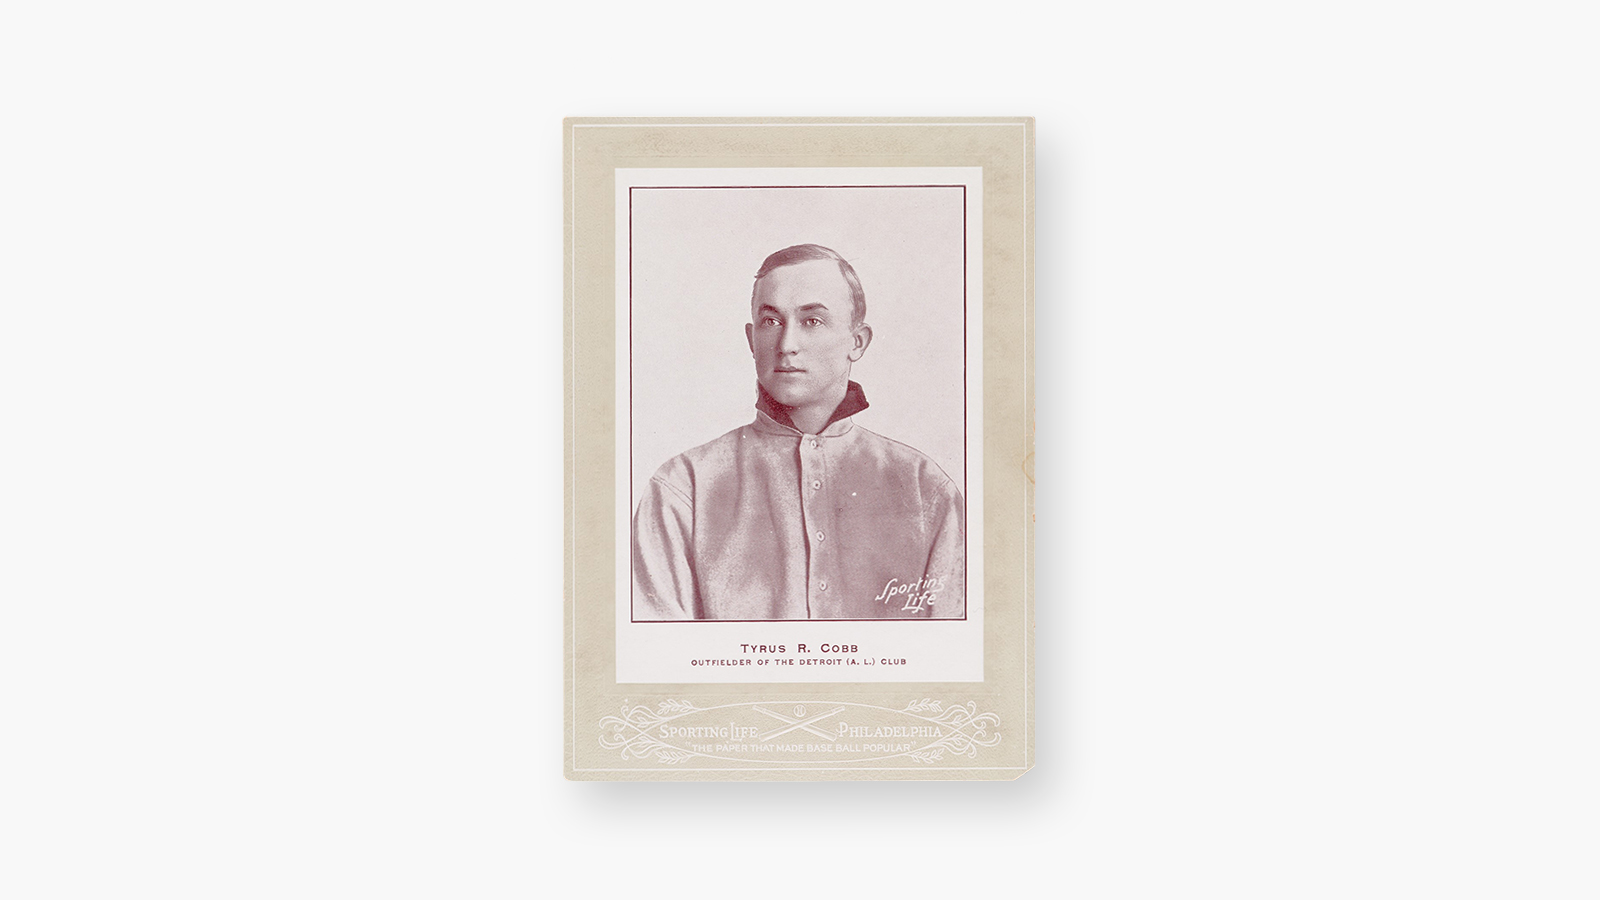 This Rare Ty Cobb Baseball Card Was Found in a Paper Bag